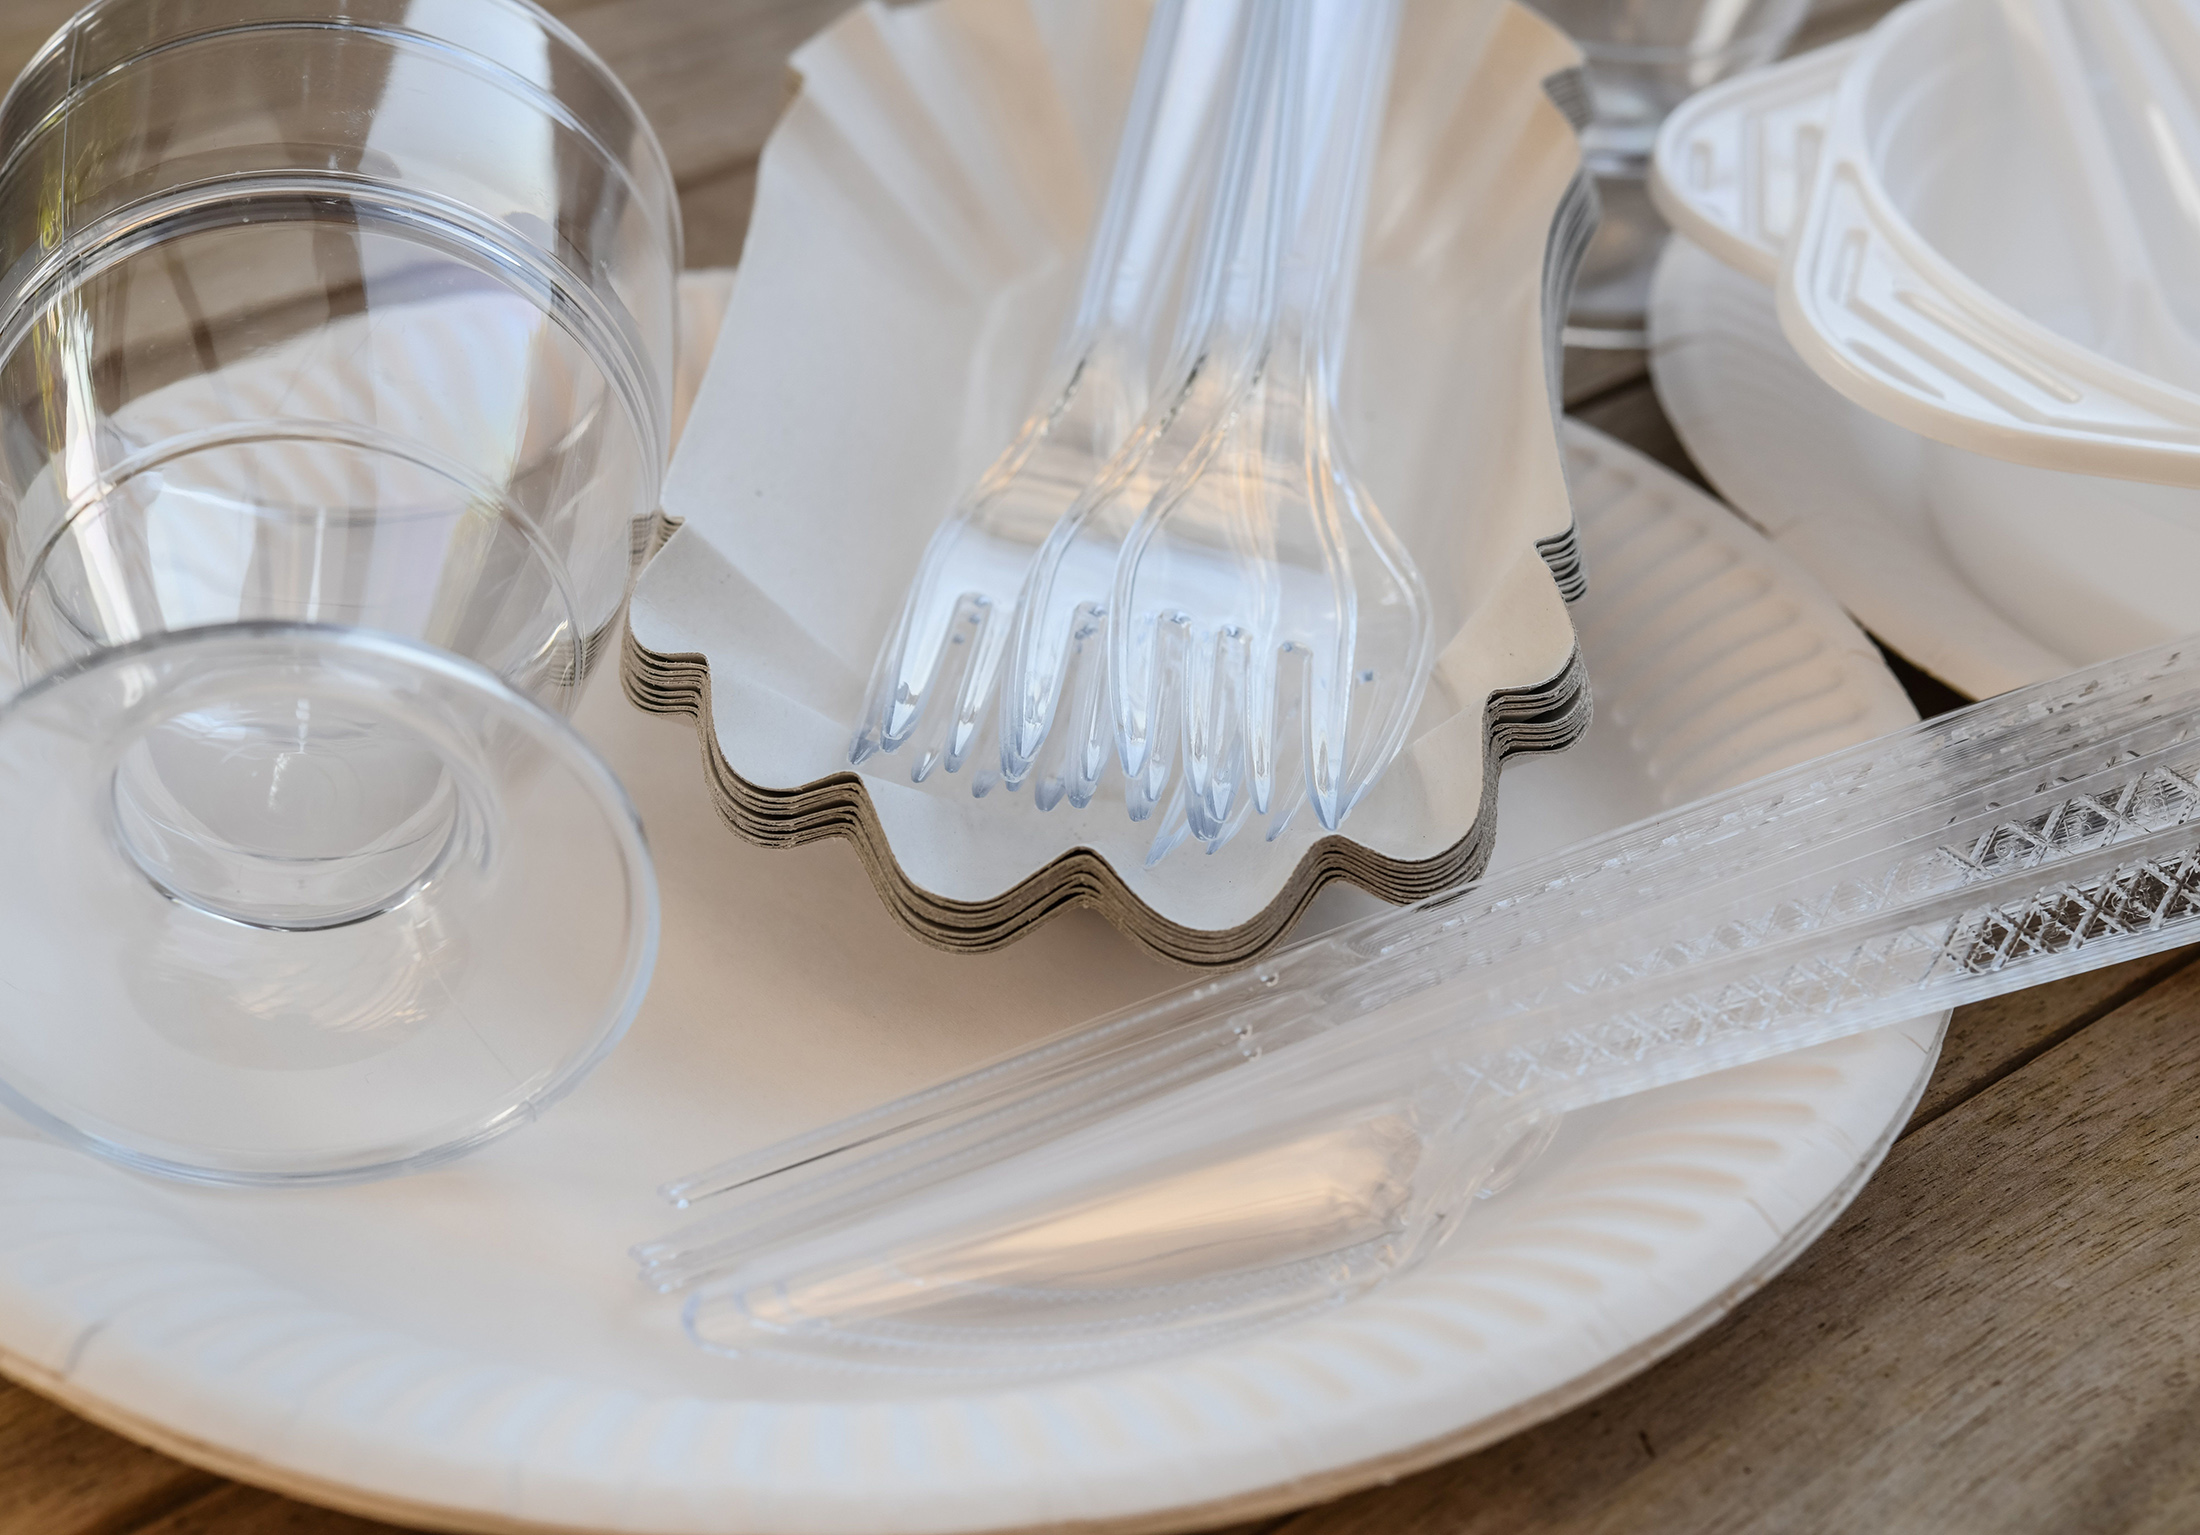 How bringing your own cutlery helps solve the plastic crisis